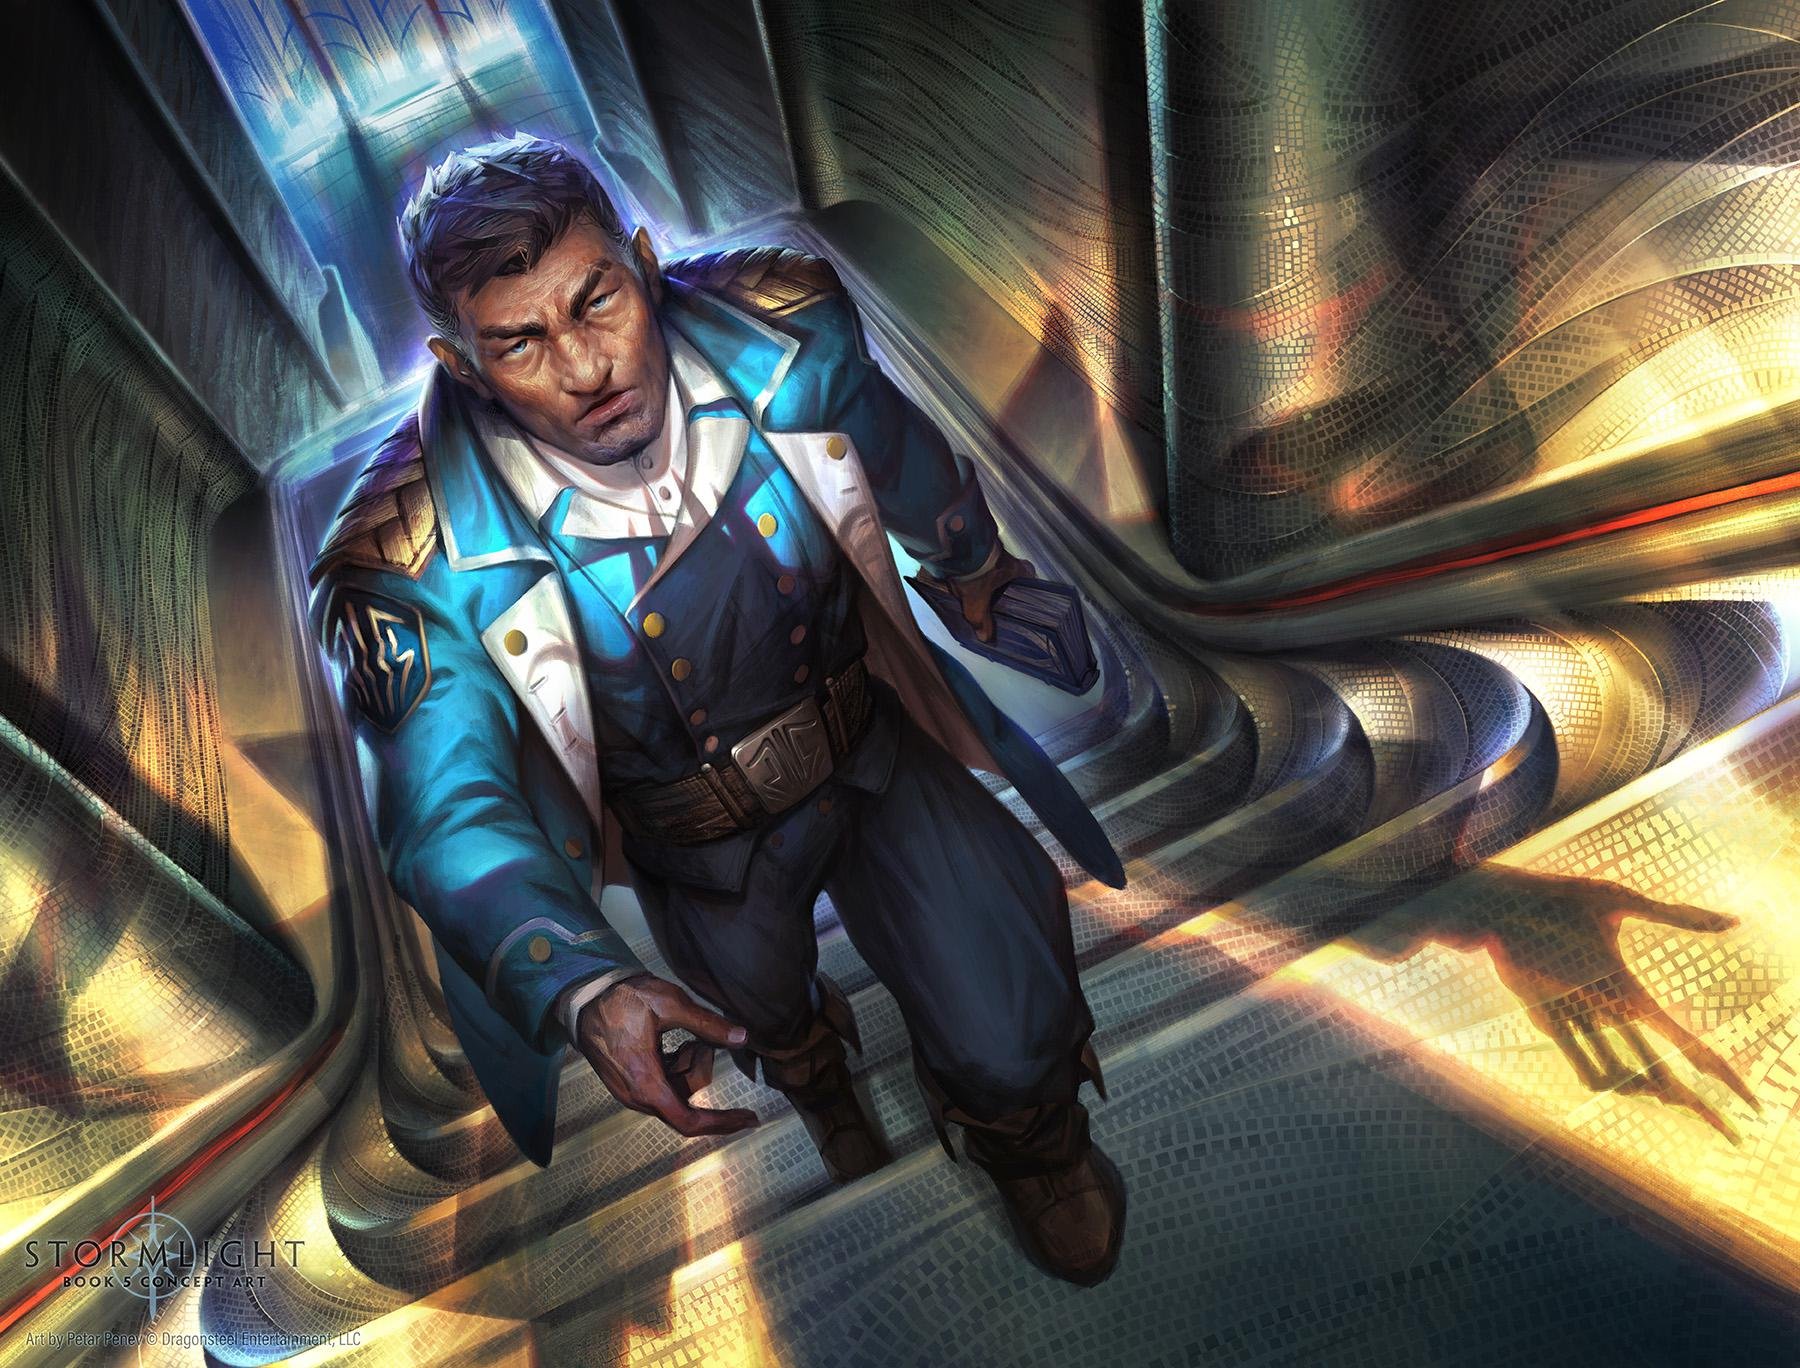 More information about "Stormlight Archive Recap: Main Characters"